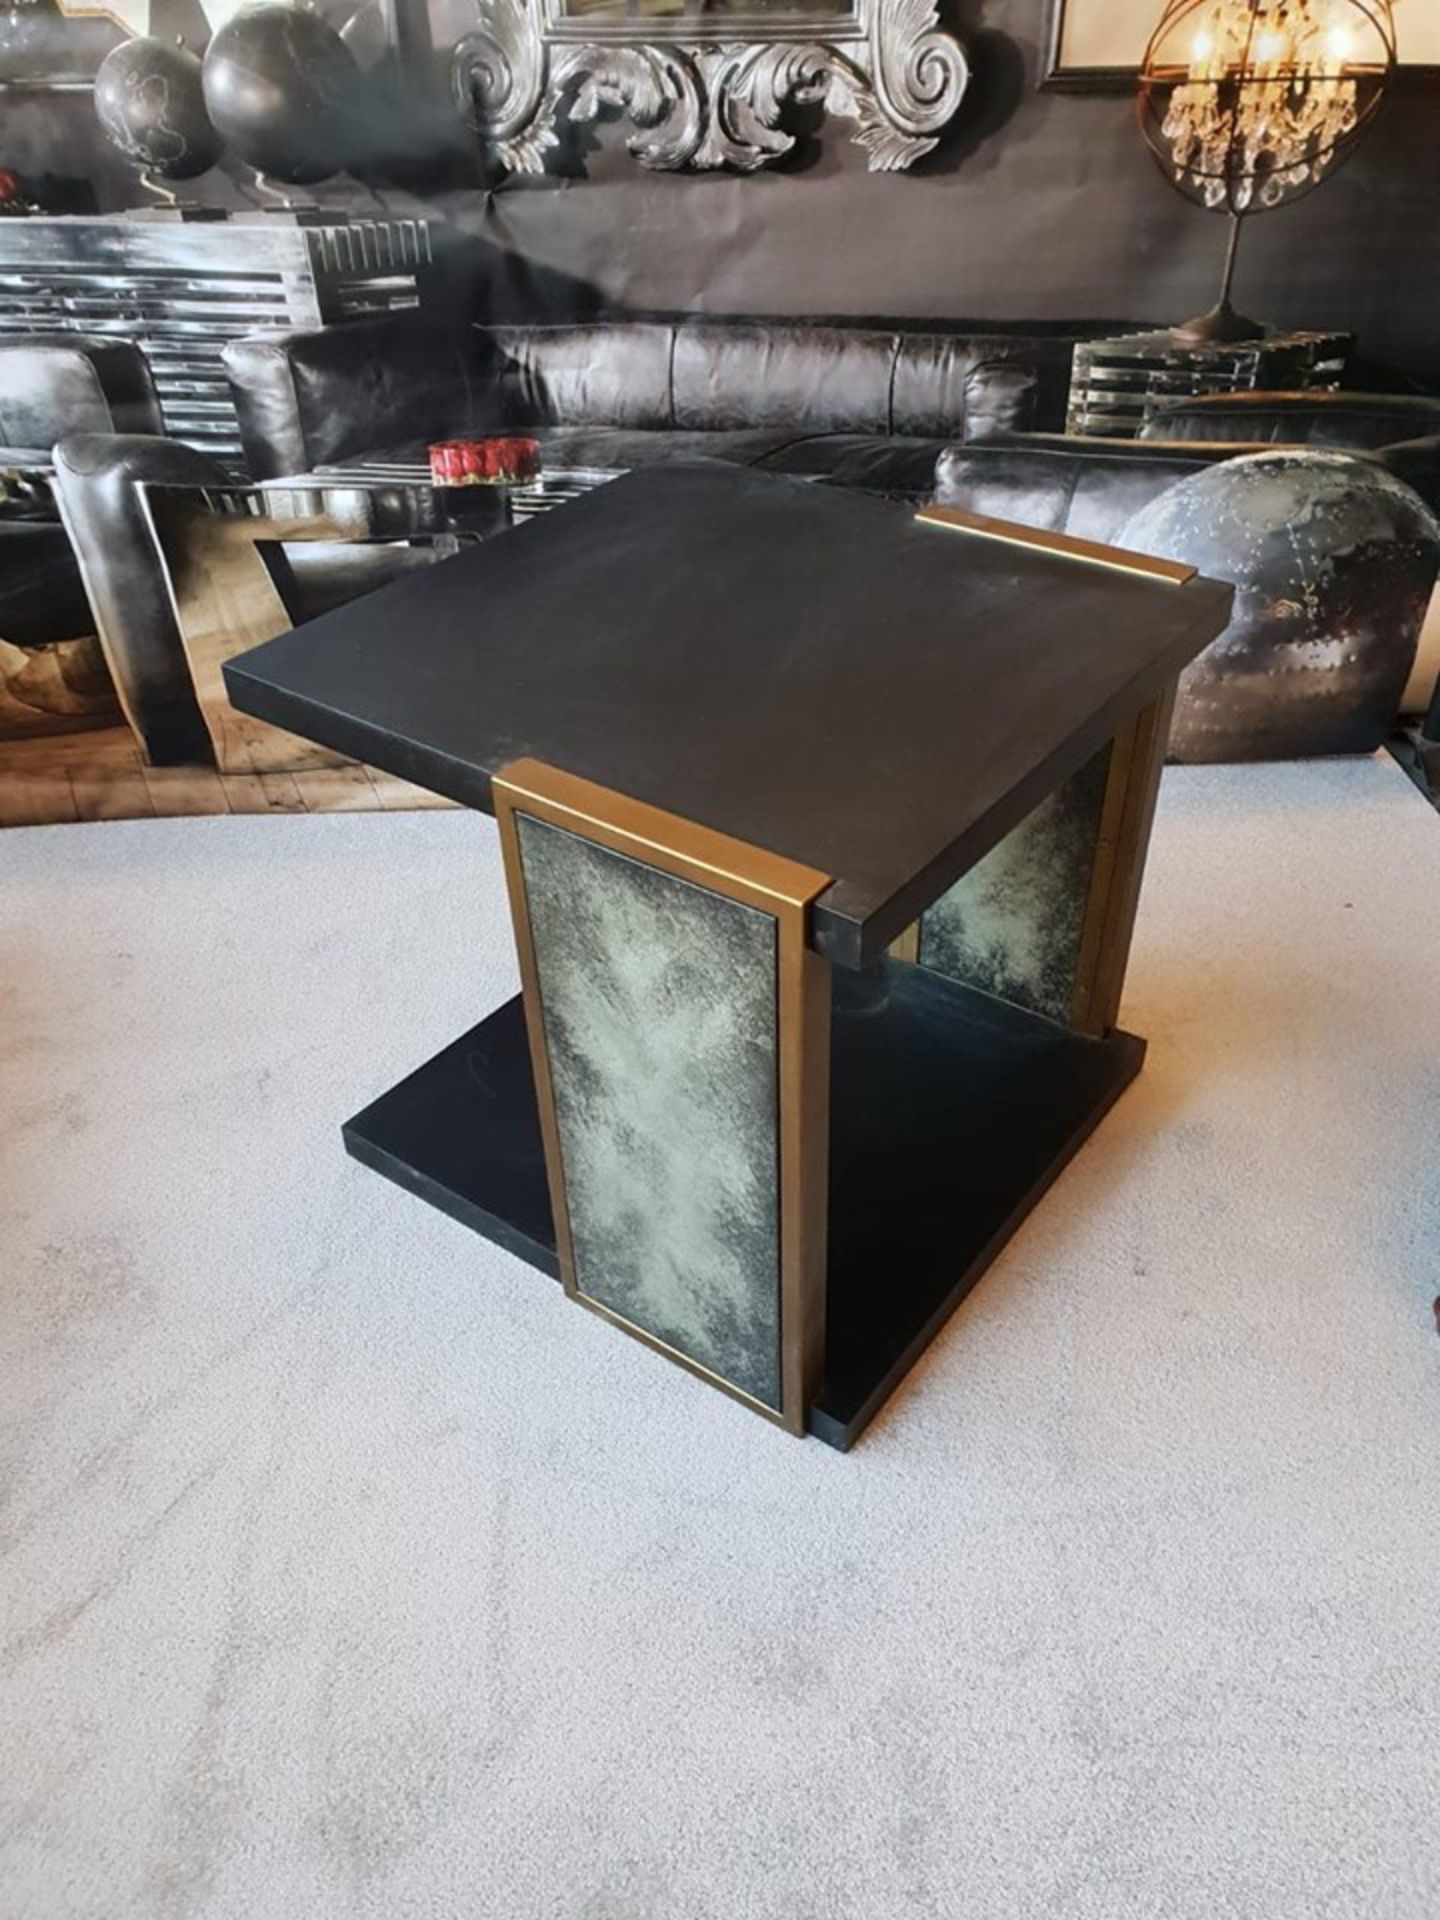 Knox Side Table Ebonized Ash And Faux Charcoal Vellum Panels 61.5 x 63.5 x 58.4 cm MSRP £921